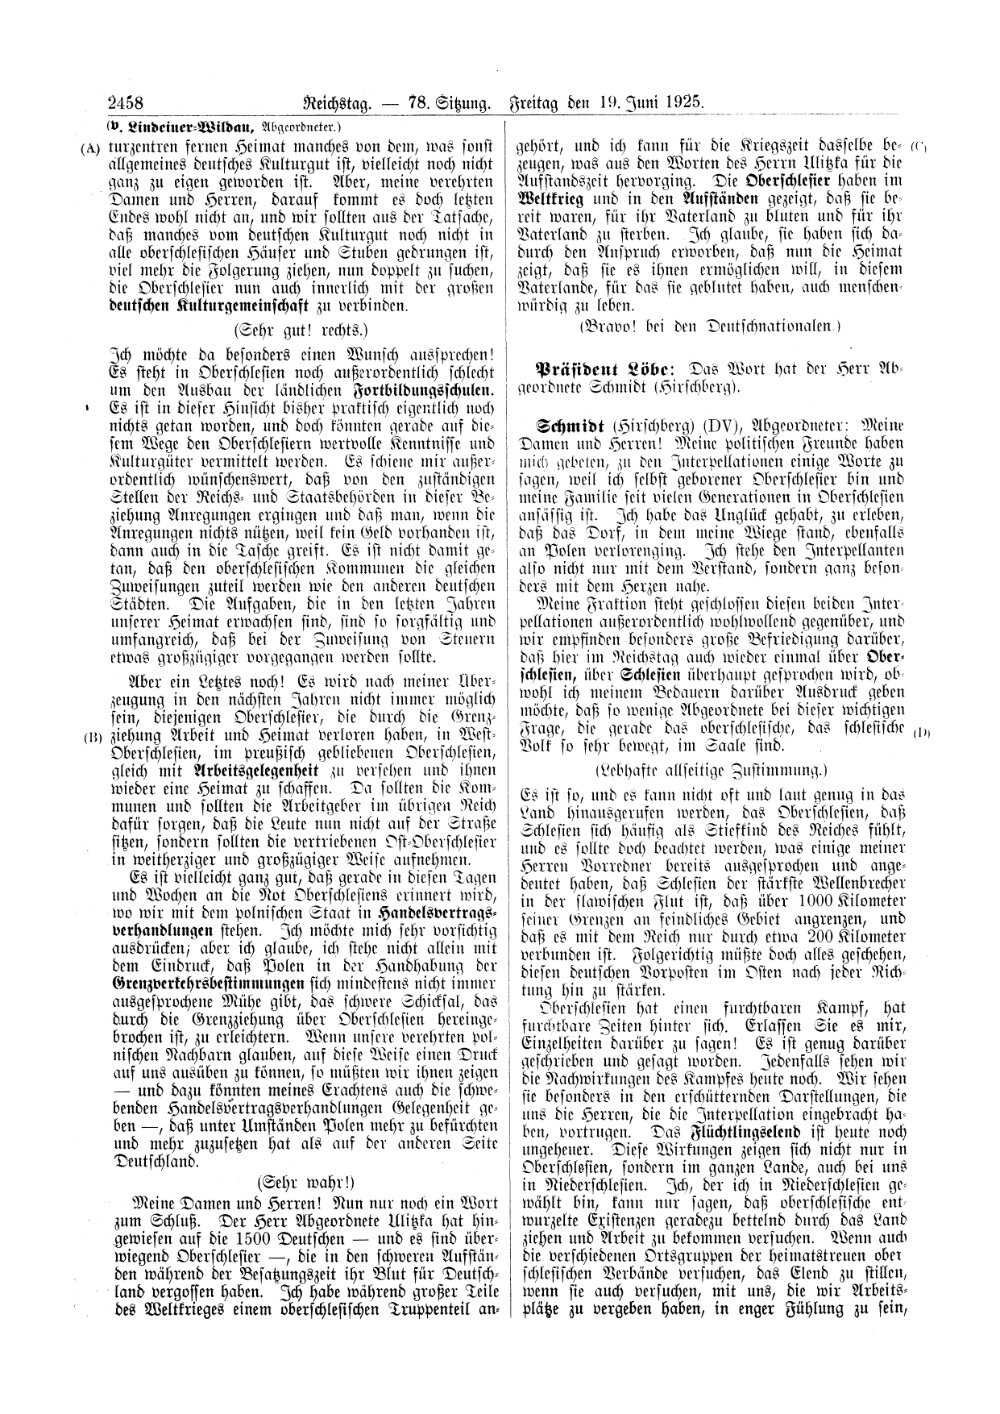 Scan of page 2458